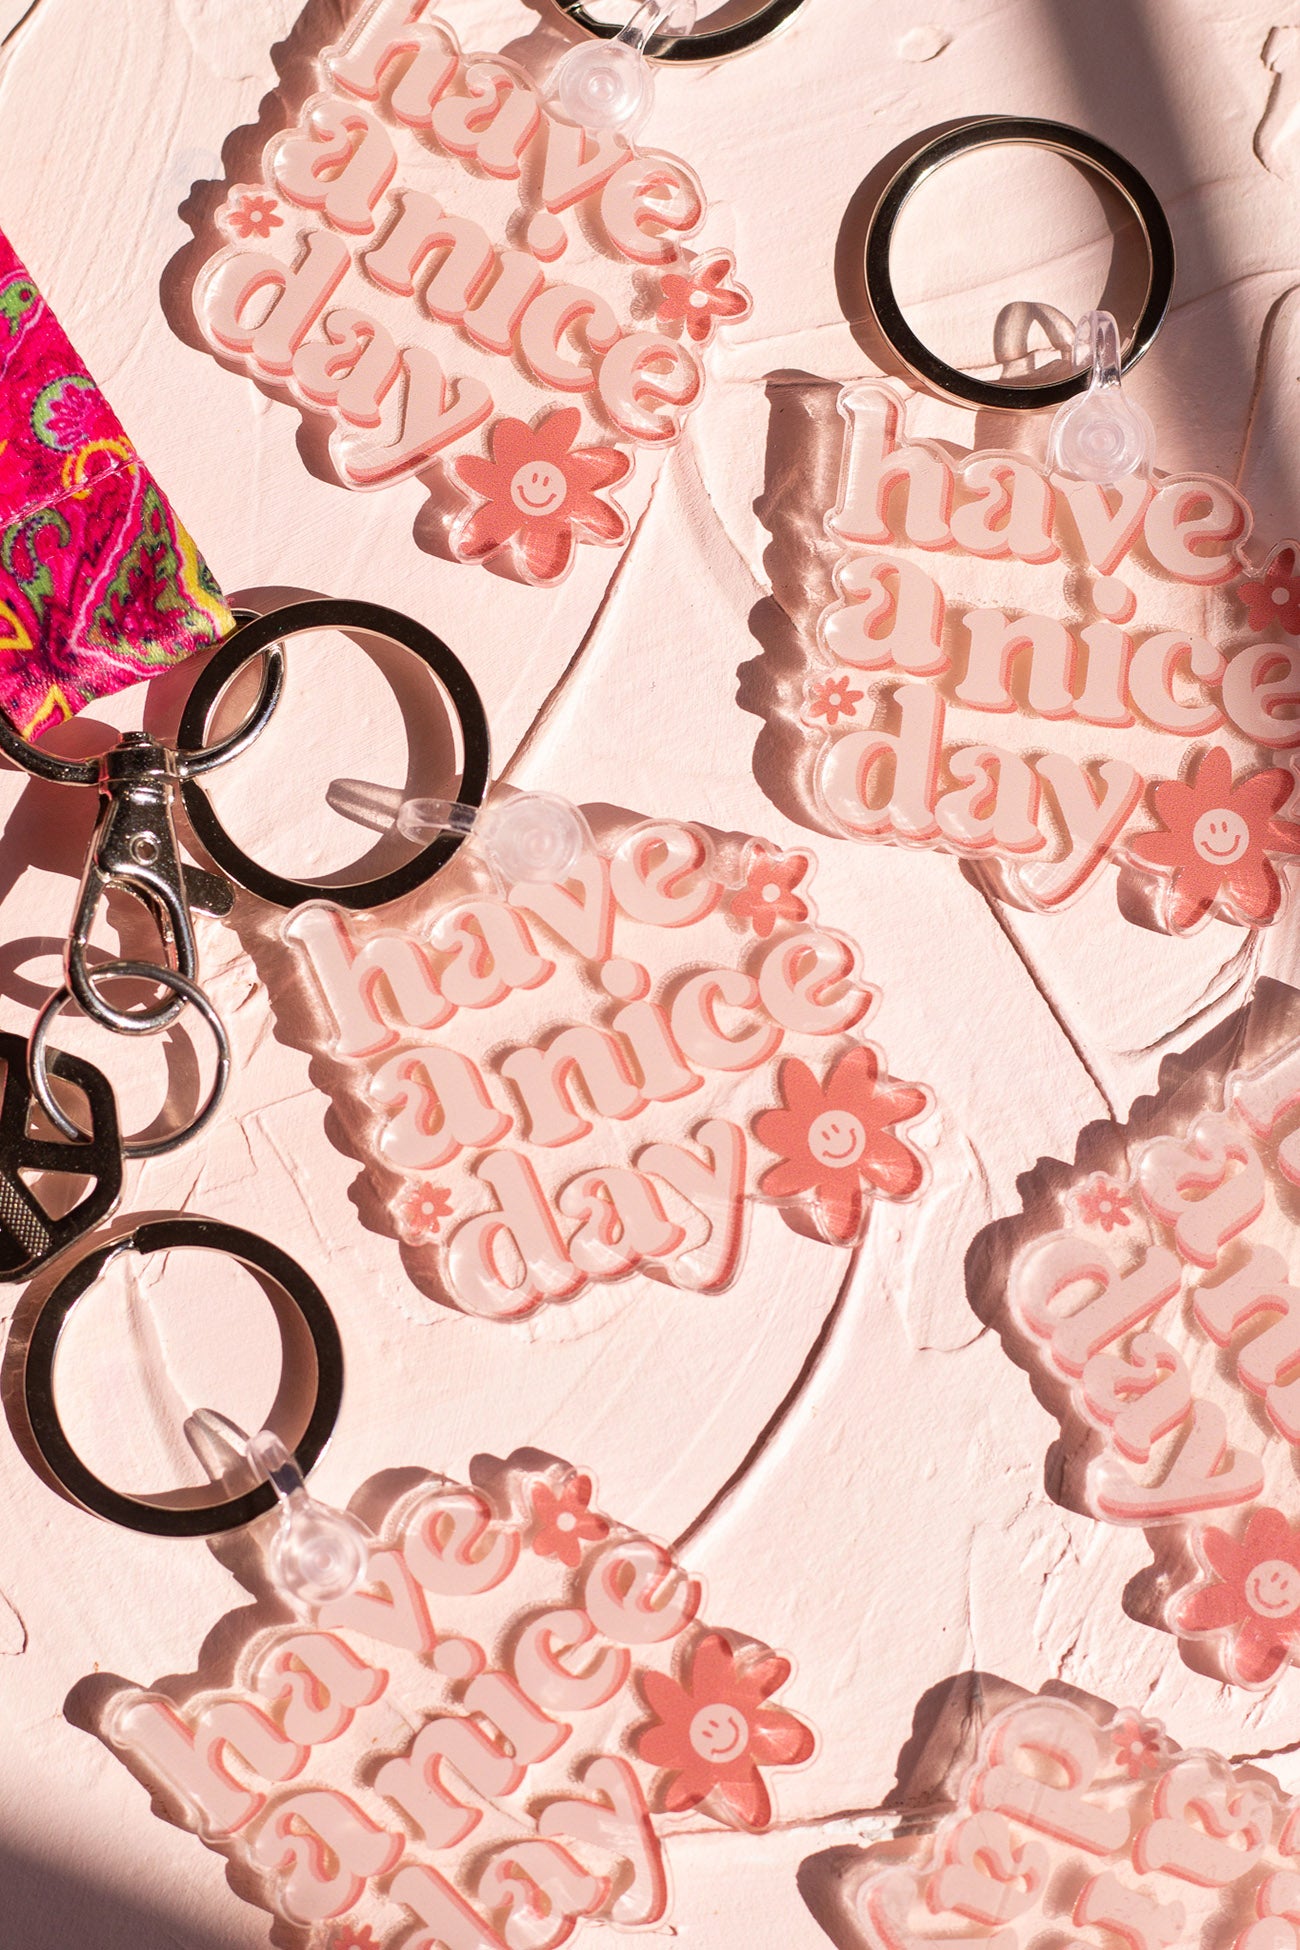 Have a Nice Day Keychains laying on a decorative background